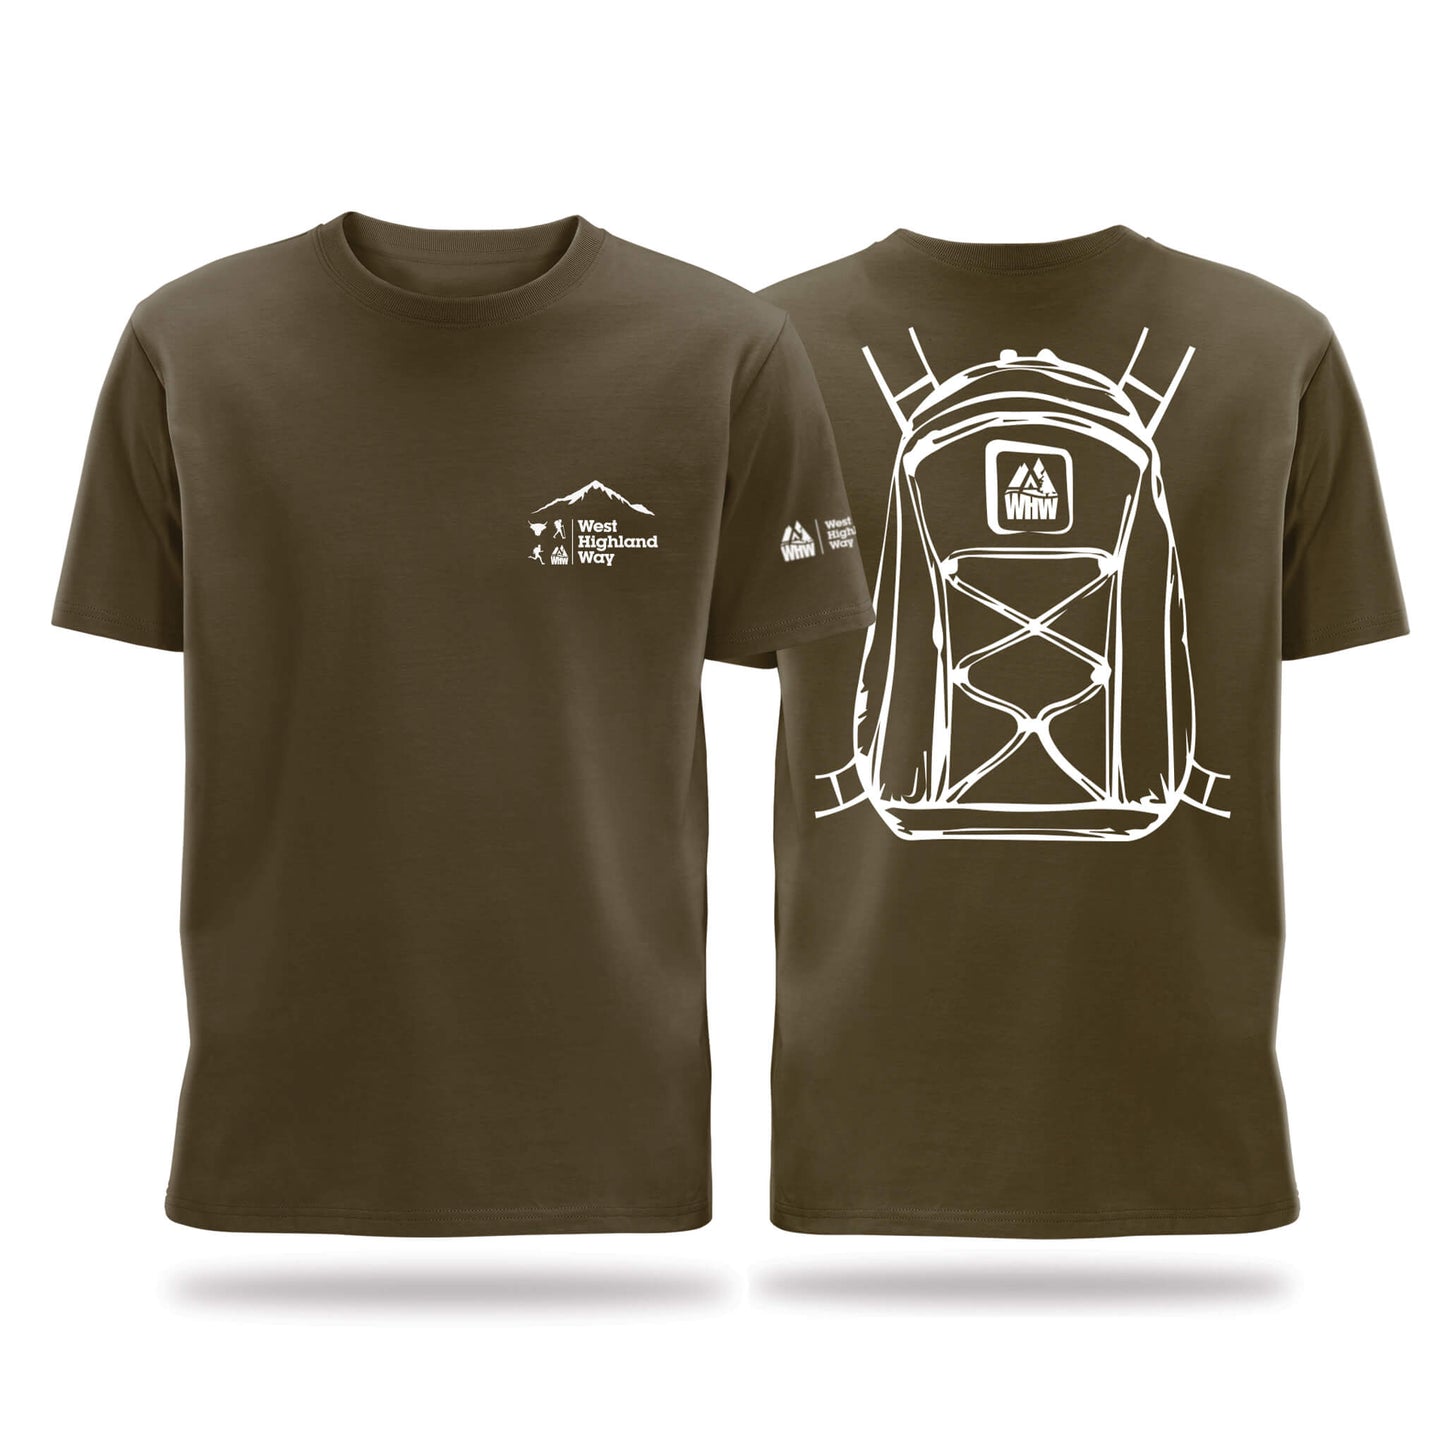 Pair of  Brown West Highland Way Backpack T-Shirts with backpack design on the back and left chest Buachaille Etive Mor WHWlogo